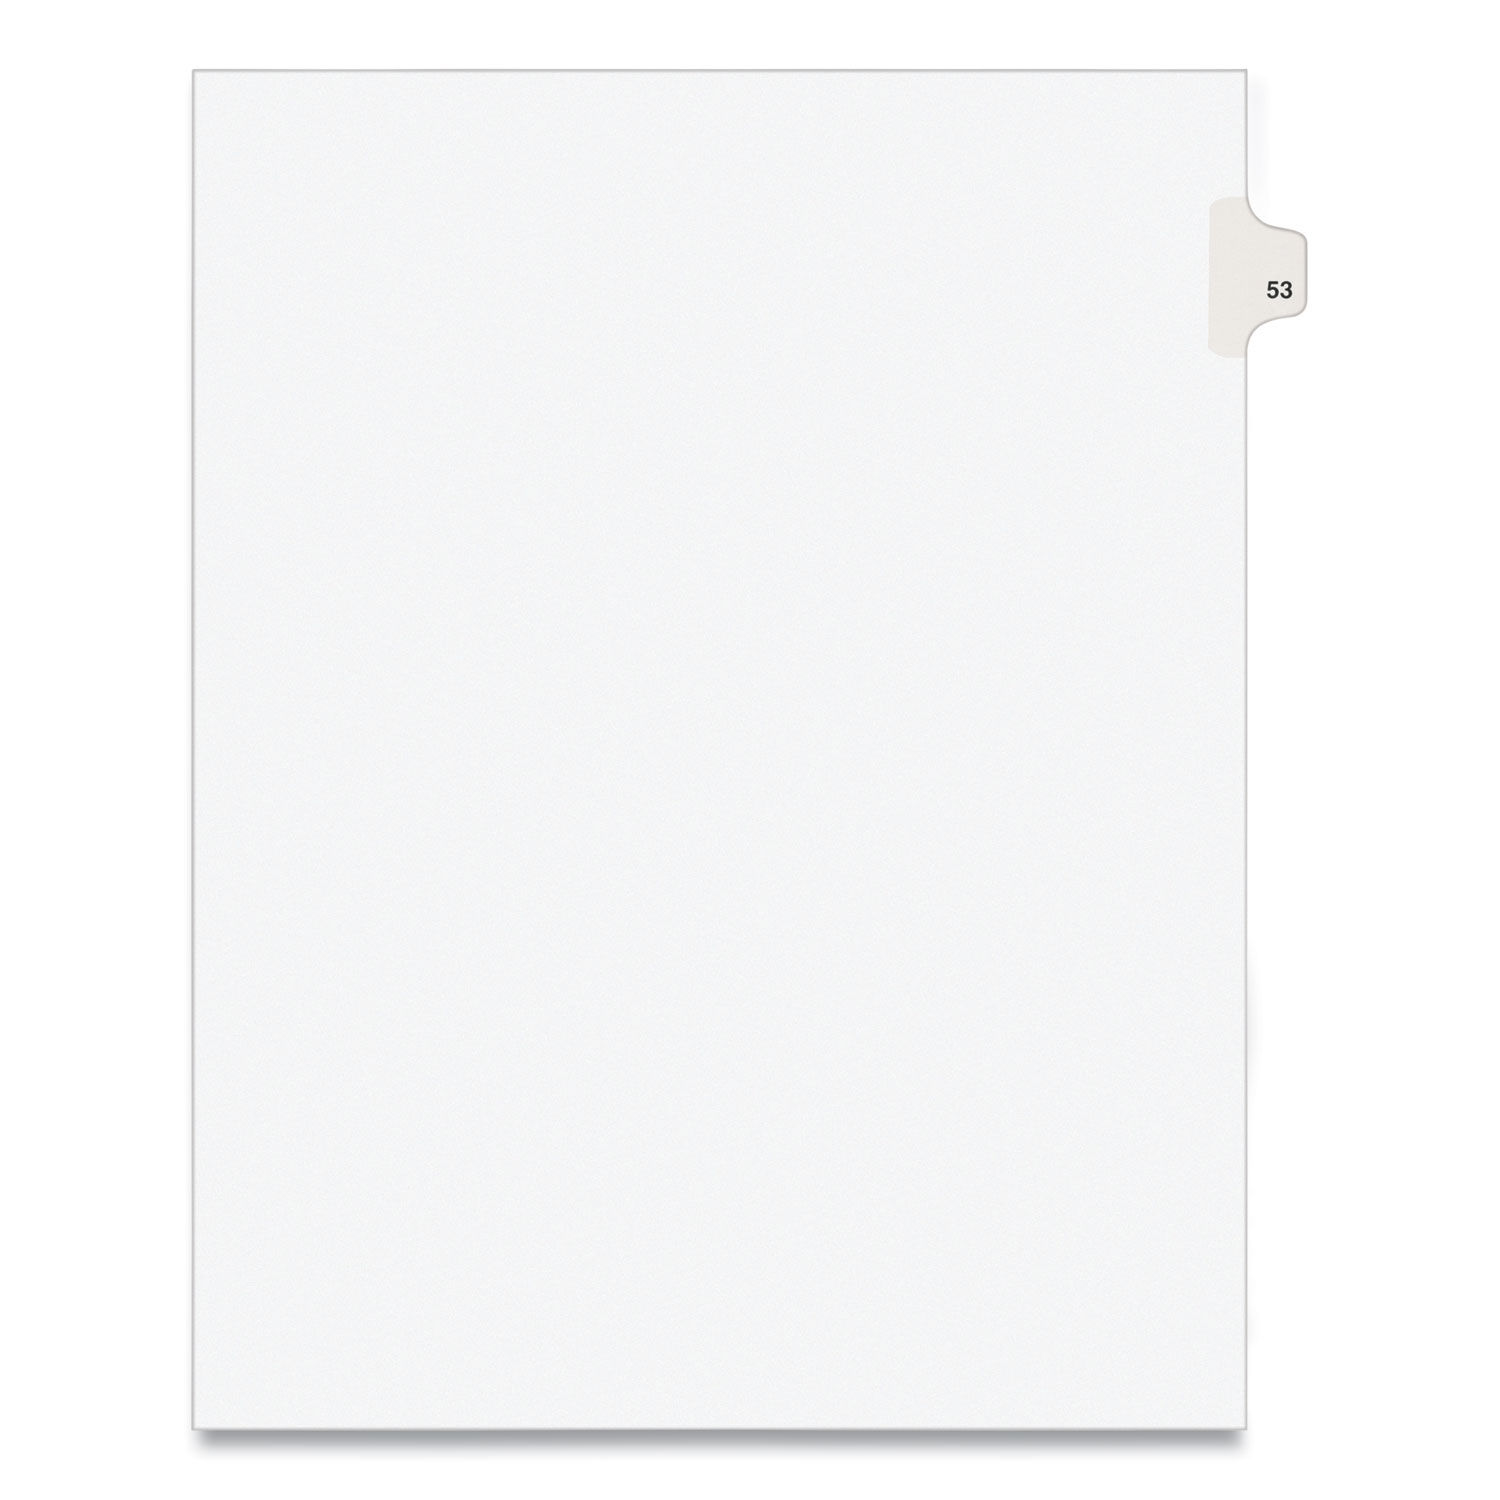 Preprinted Legal Exhibit Side Tab Index Dividers Avery Style, 10-Tab, 53, 11 x 8.5, White, 25/Pack, (1053)